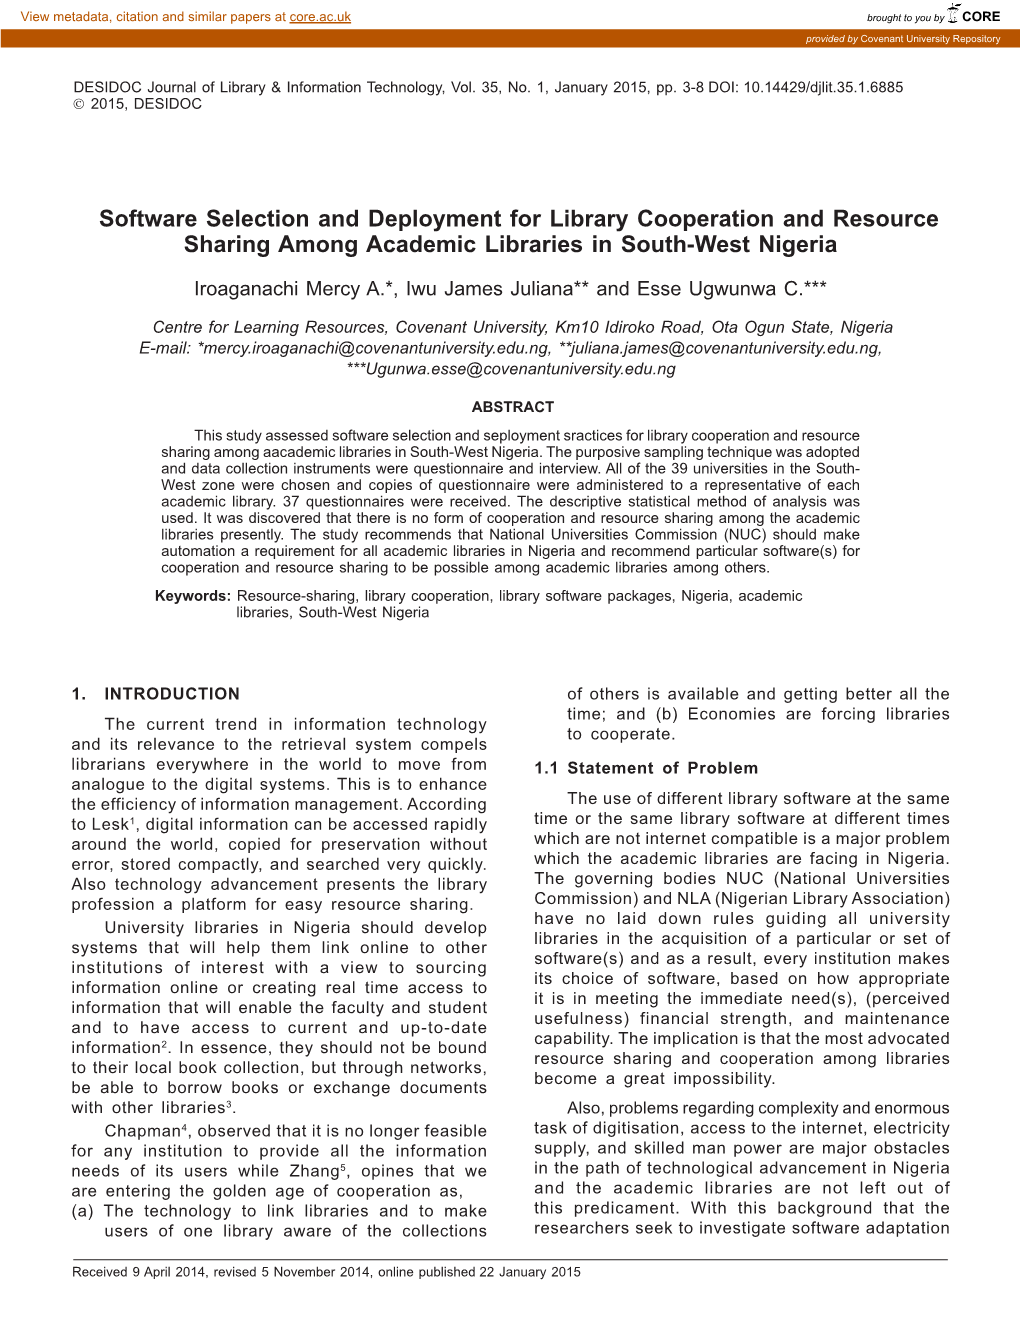 Software Selection and Deployment for Library Cooperation and Resource Sharing Among Academic Libraries in South-West Nigeria